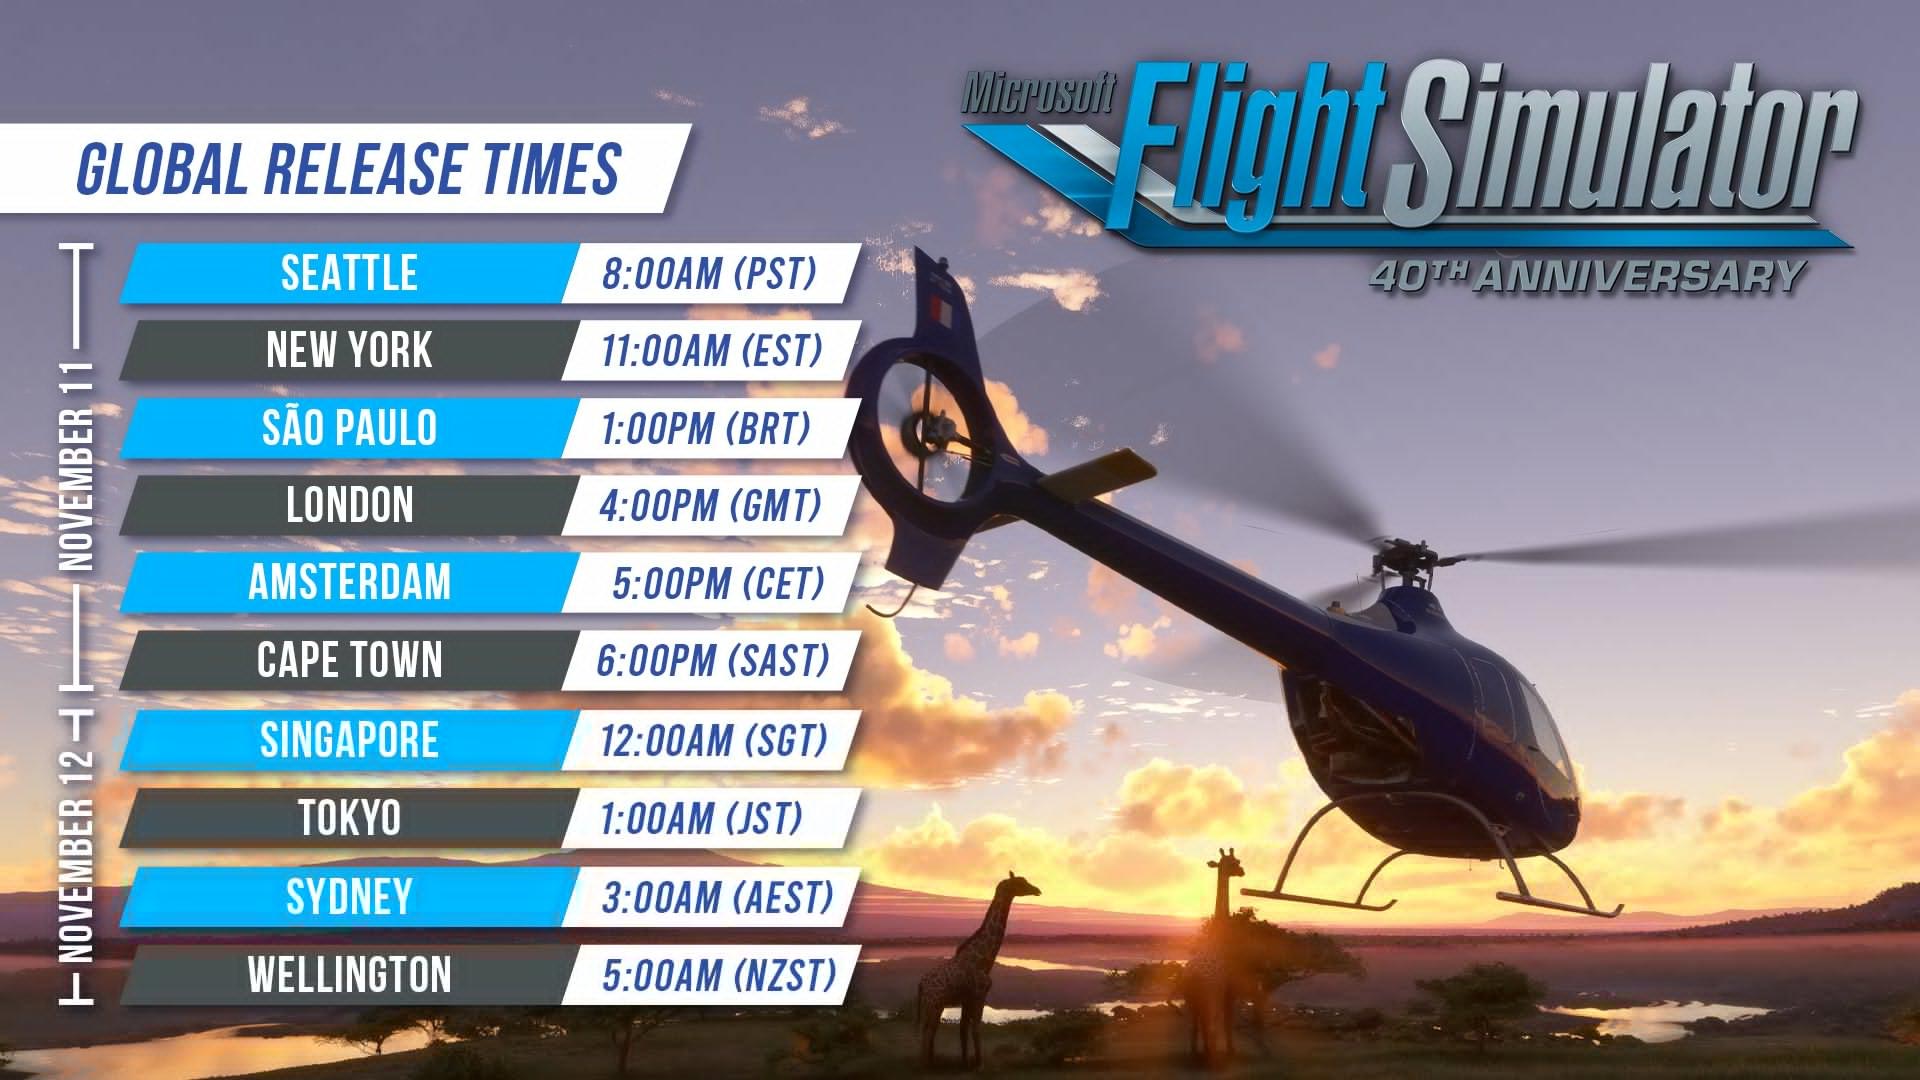 Microsoft Flight Simulator Sim Update 11 (40th Anniversay Edition) Launches This Week; Global Release Times Revealed!